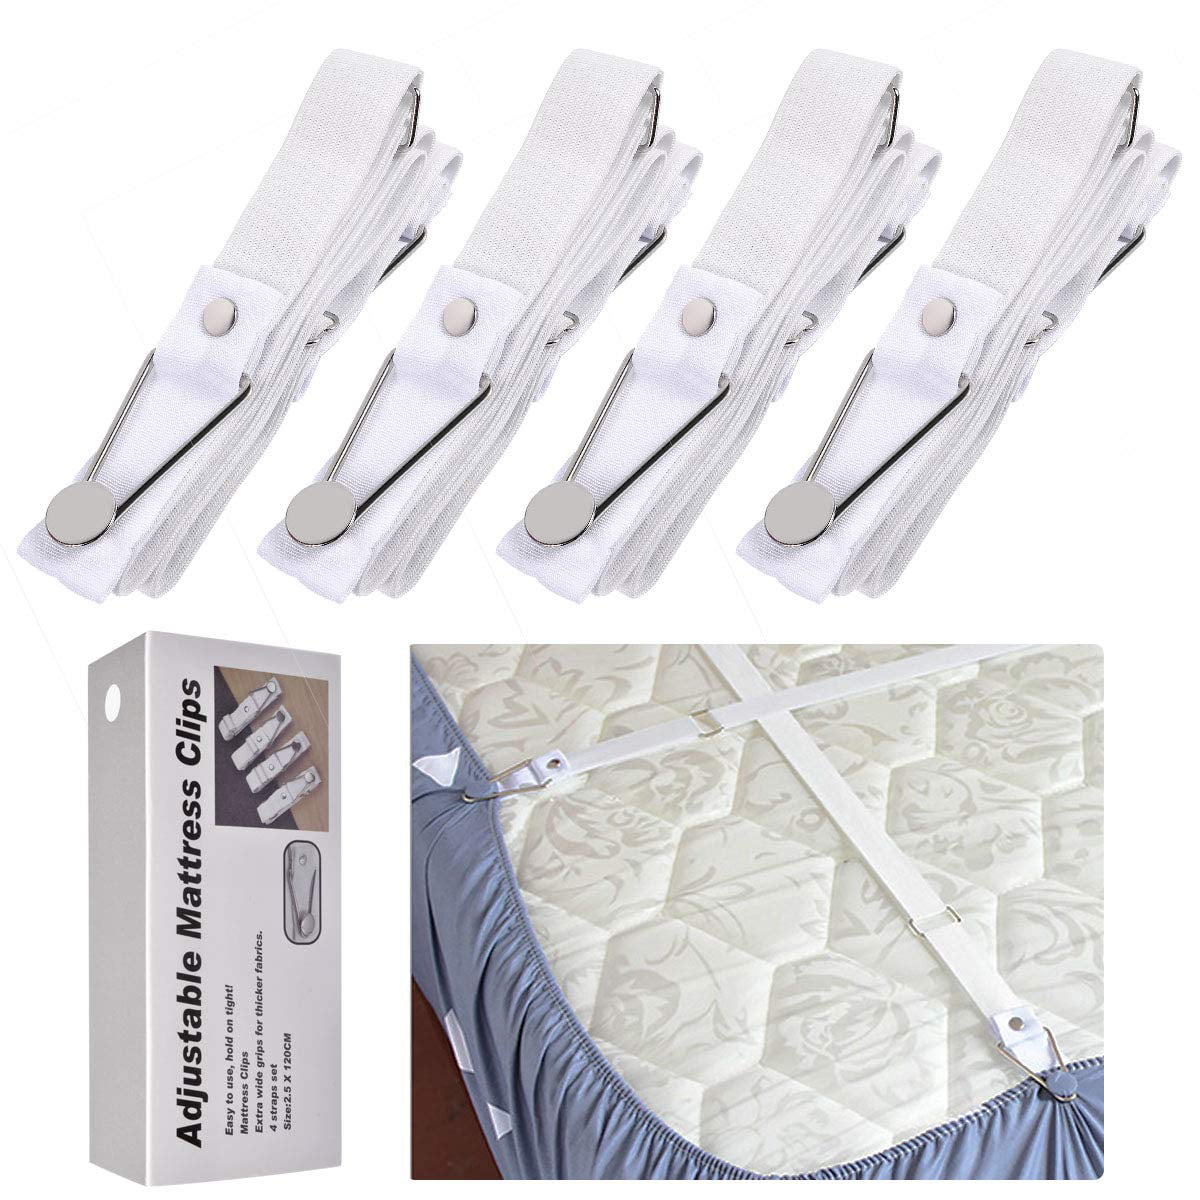 Adjustable Bed Sheet Cover Grippers Suspenders Holder Band Straps Clips Fasteners Mattress Cover Fasteners Set of 12